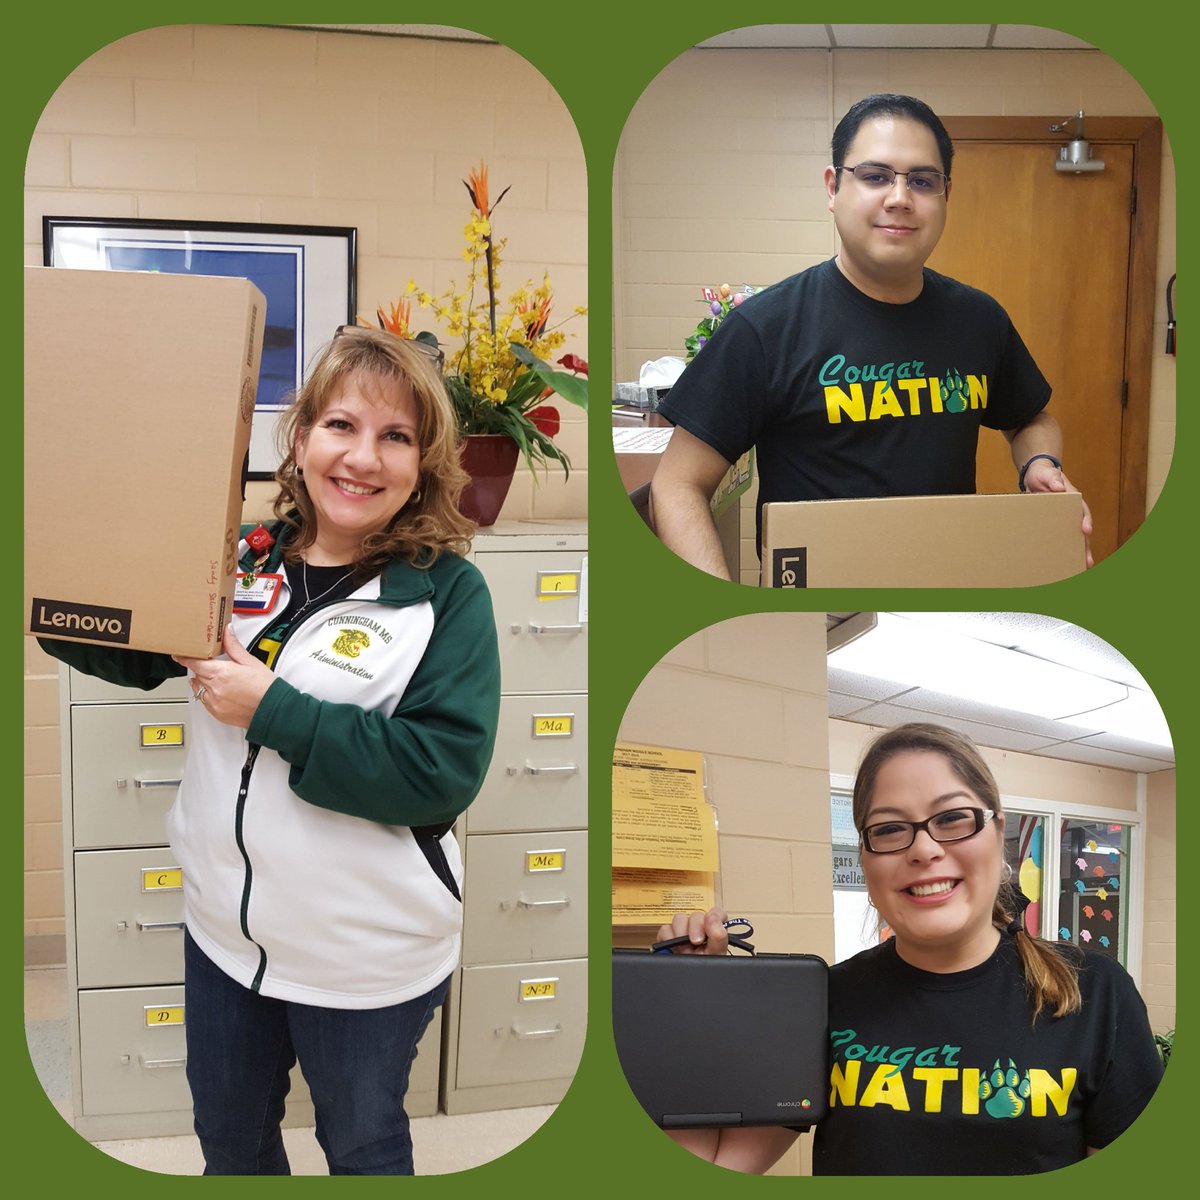 Chromebooks for @CCISD @CunninghamMSCC ! What a great way to come back from Spring Break! #getyourtechon #techsavvysaturdays @salinas_deleon